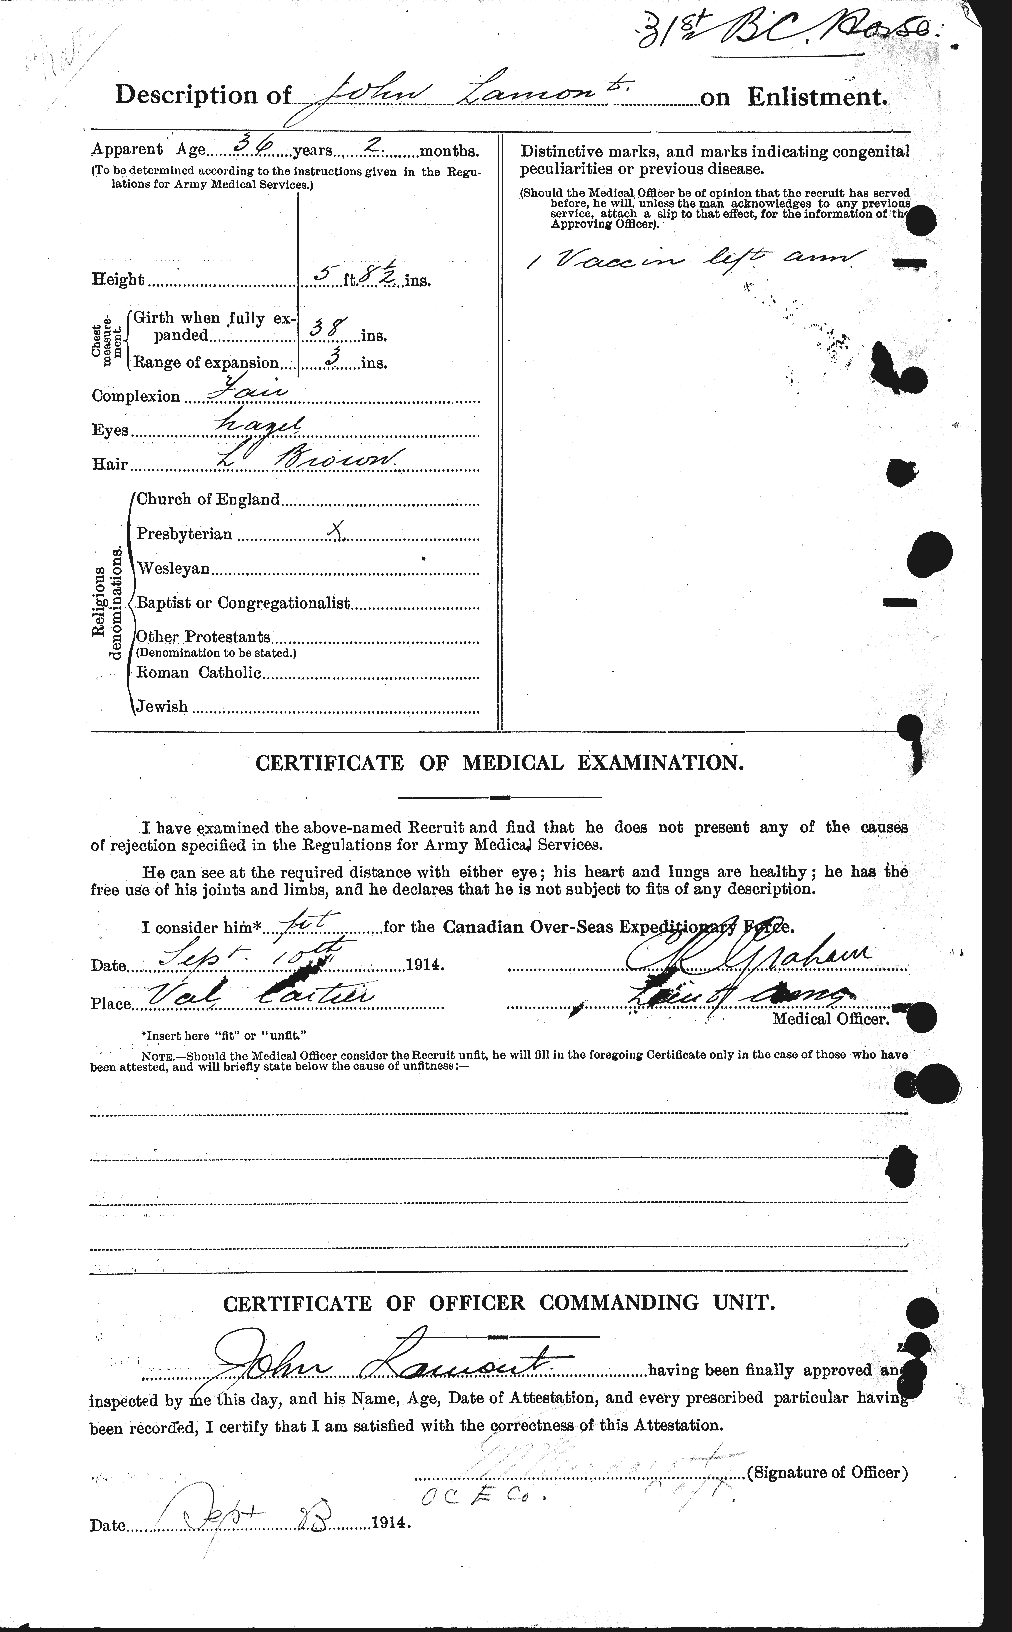 Personnel Records of the First World War - CEF 447953b